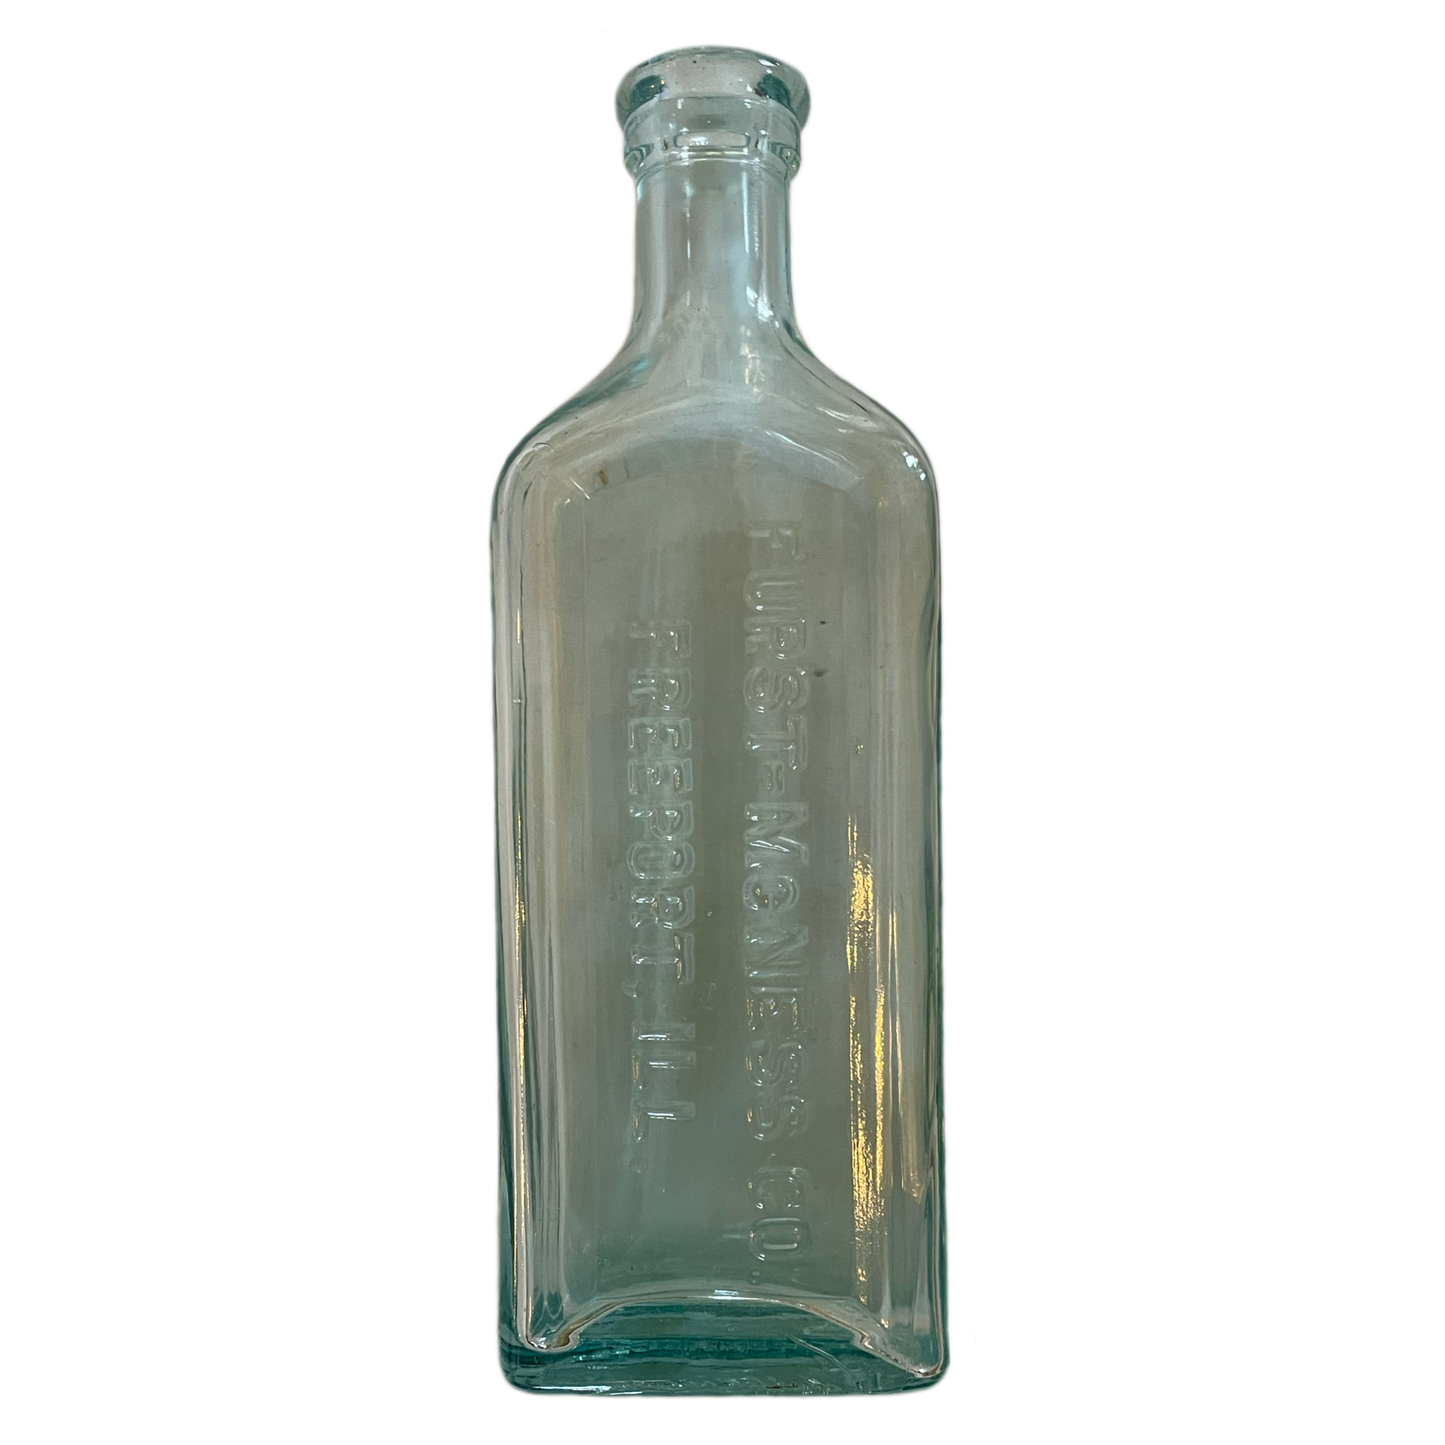 Dr. WB Caldwell's Glass Bottle